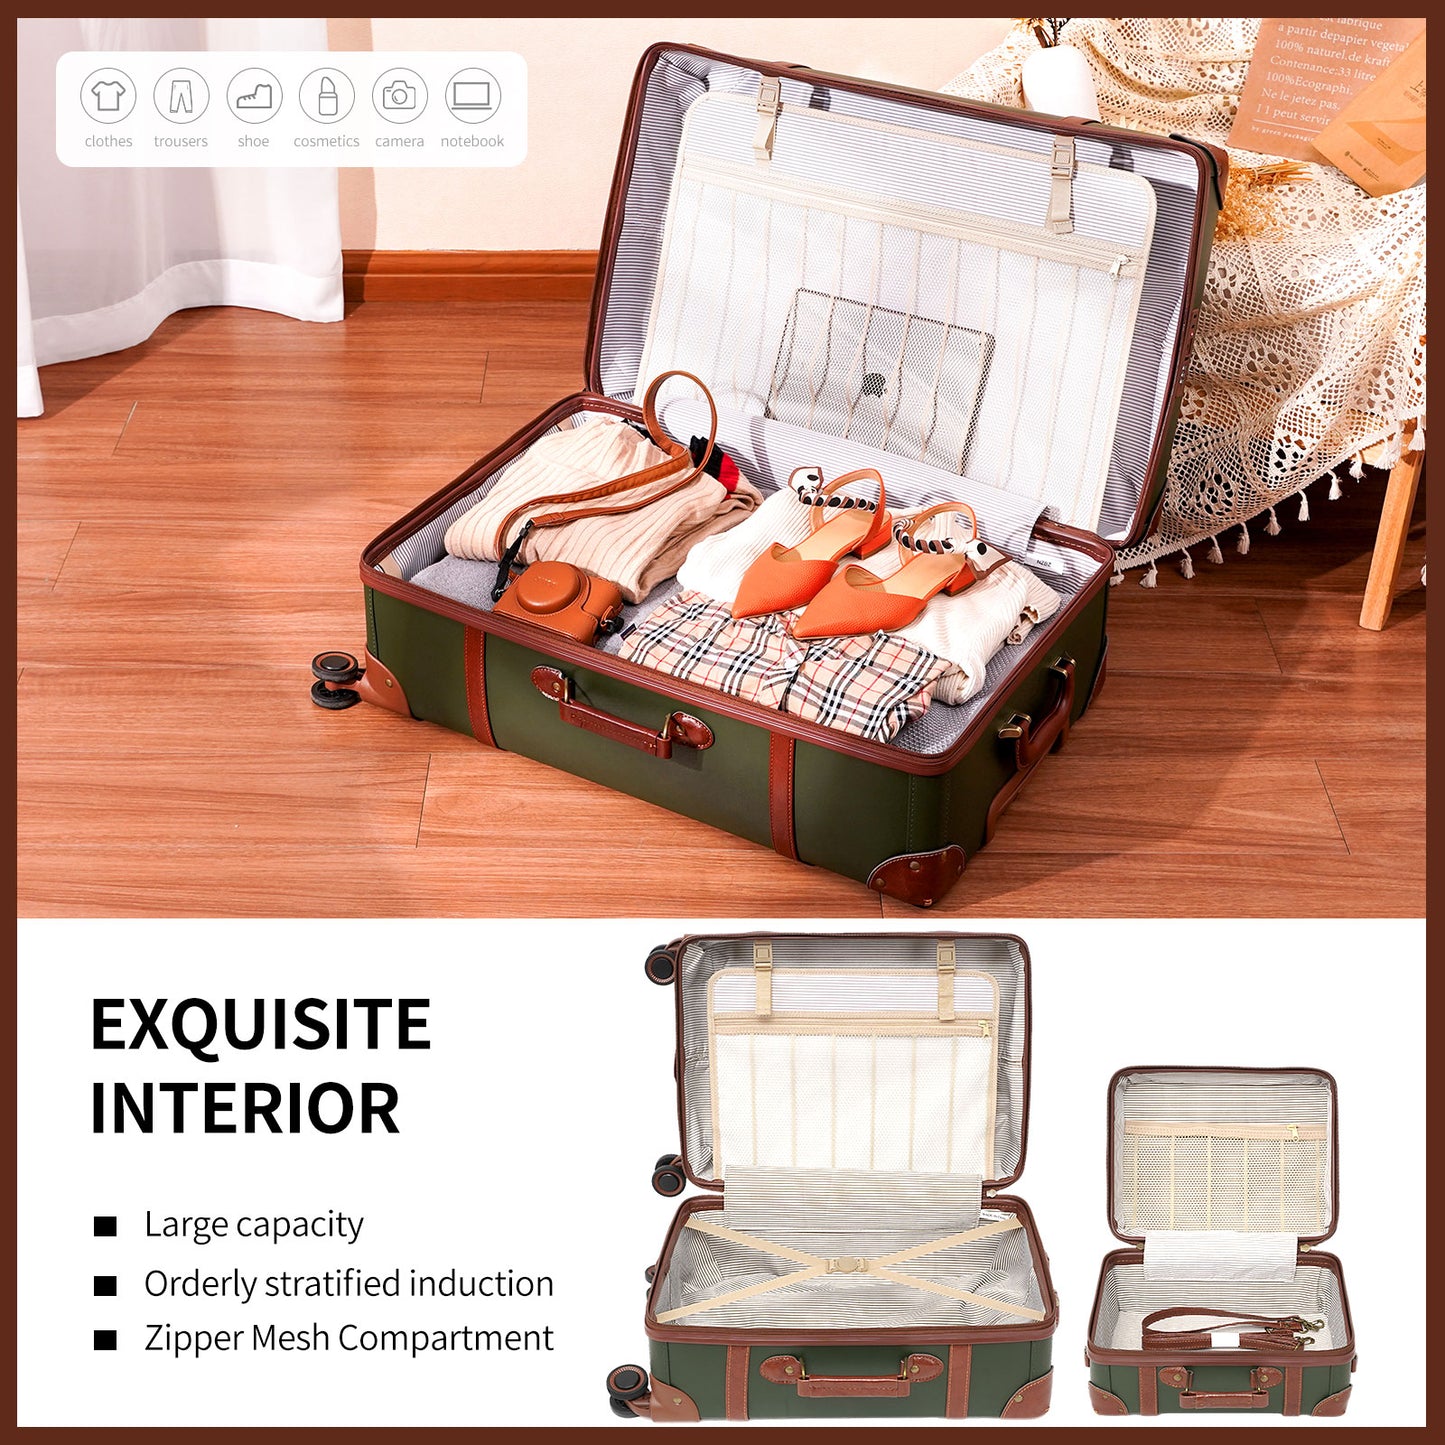 NZBZ Vintage Luggage Sets 3 Pieces Luxury Cute Suitcase Retro Trunk Luggage with TSA Lock for Men and Women (Dark Green, 14" & 20" & 28")